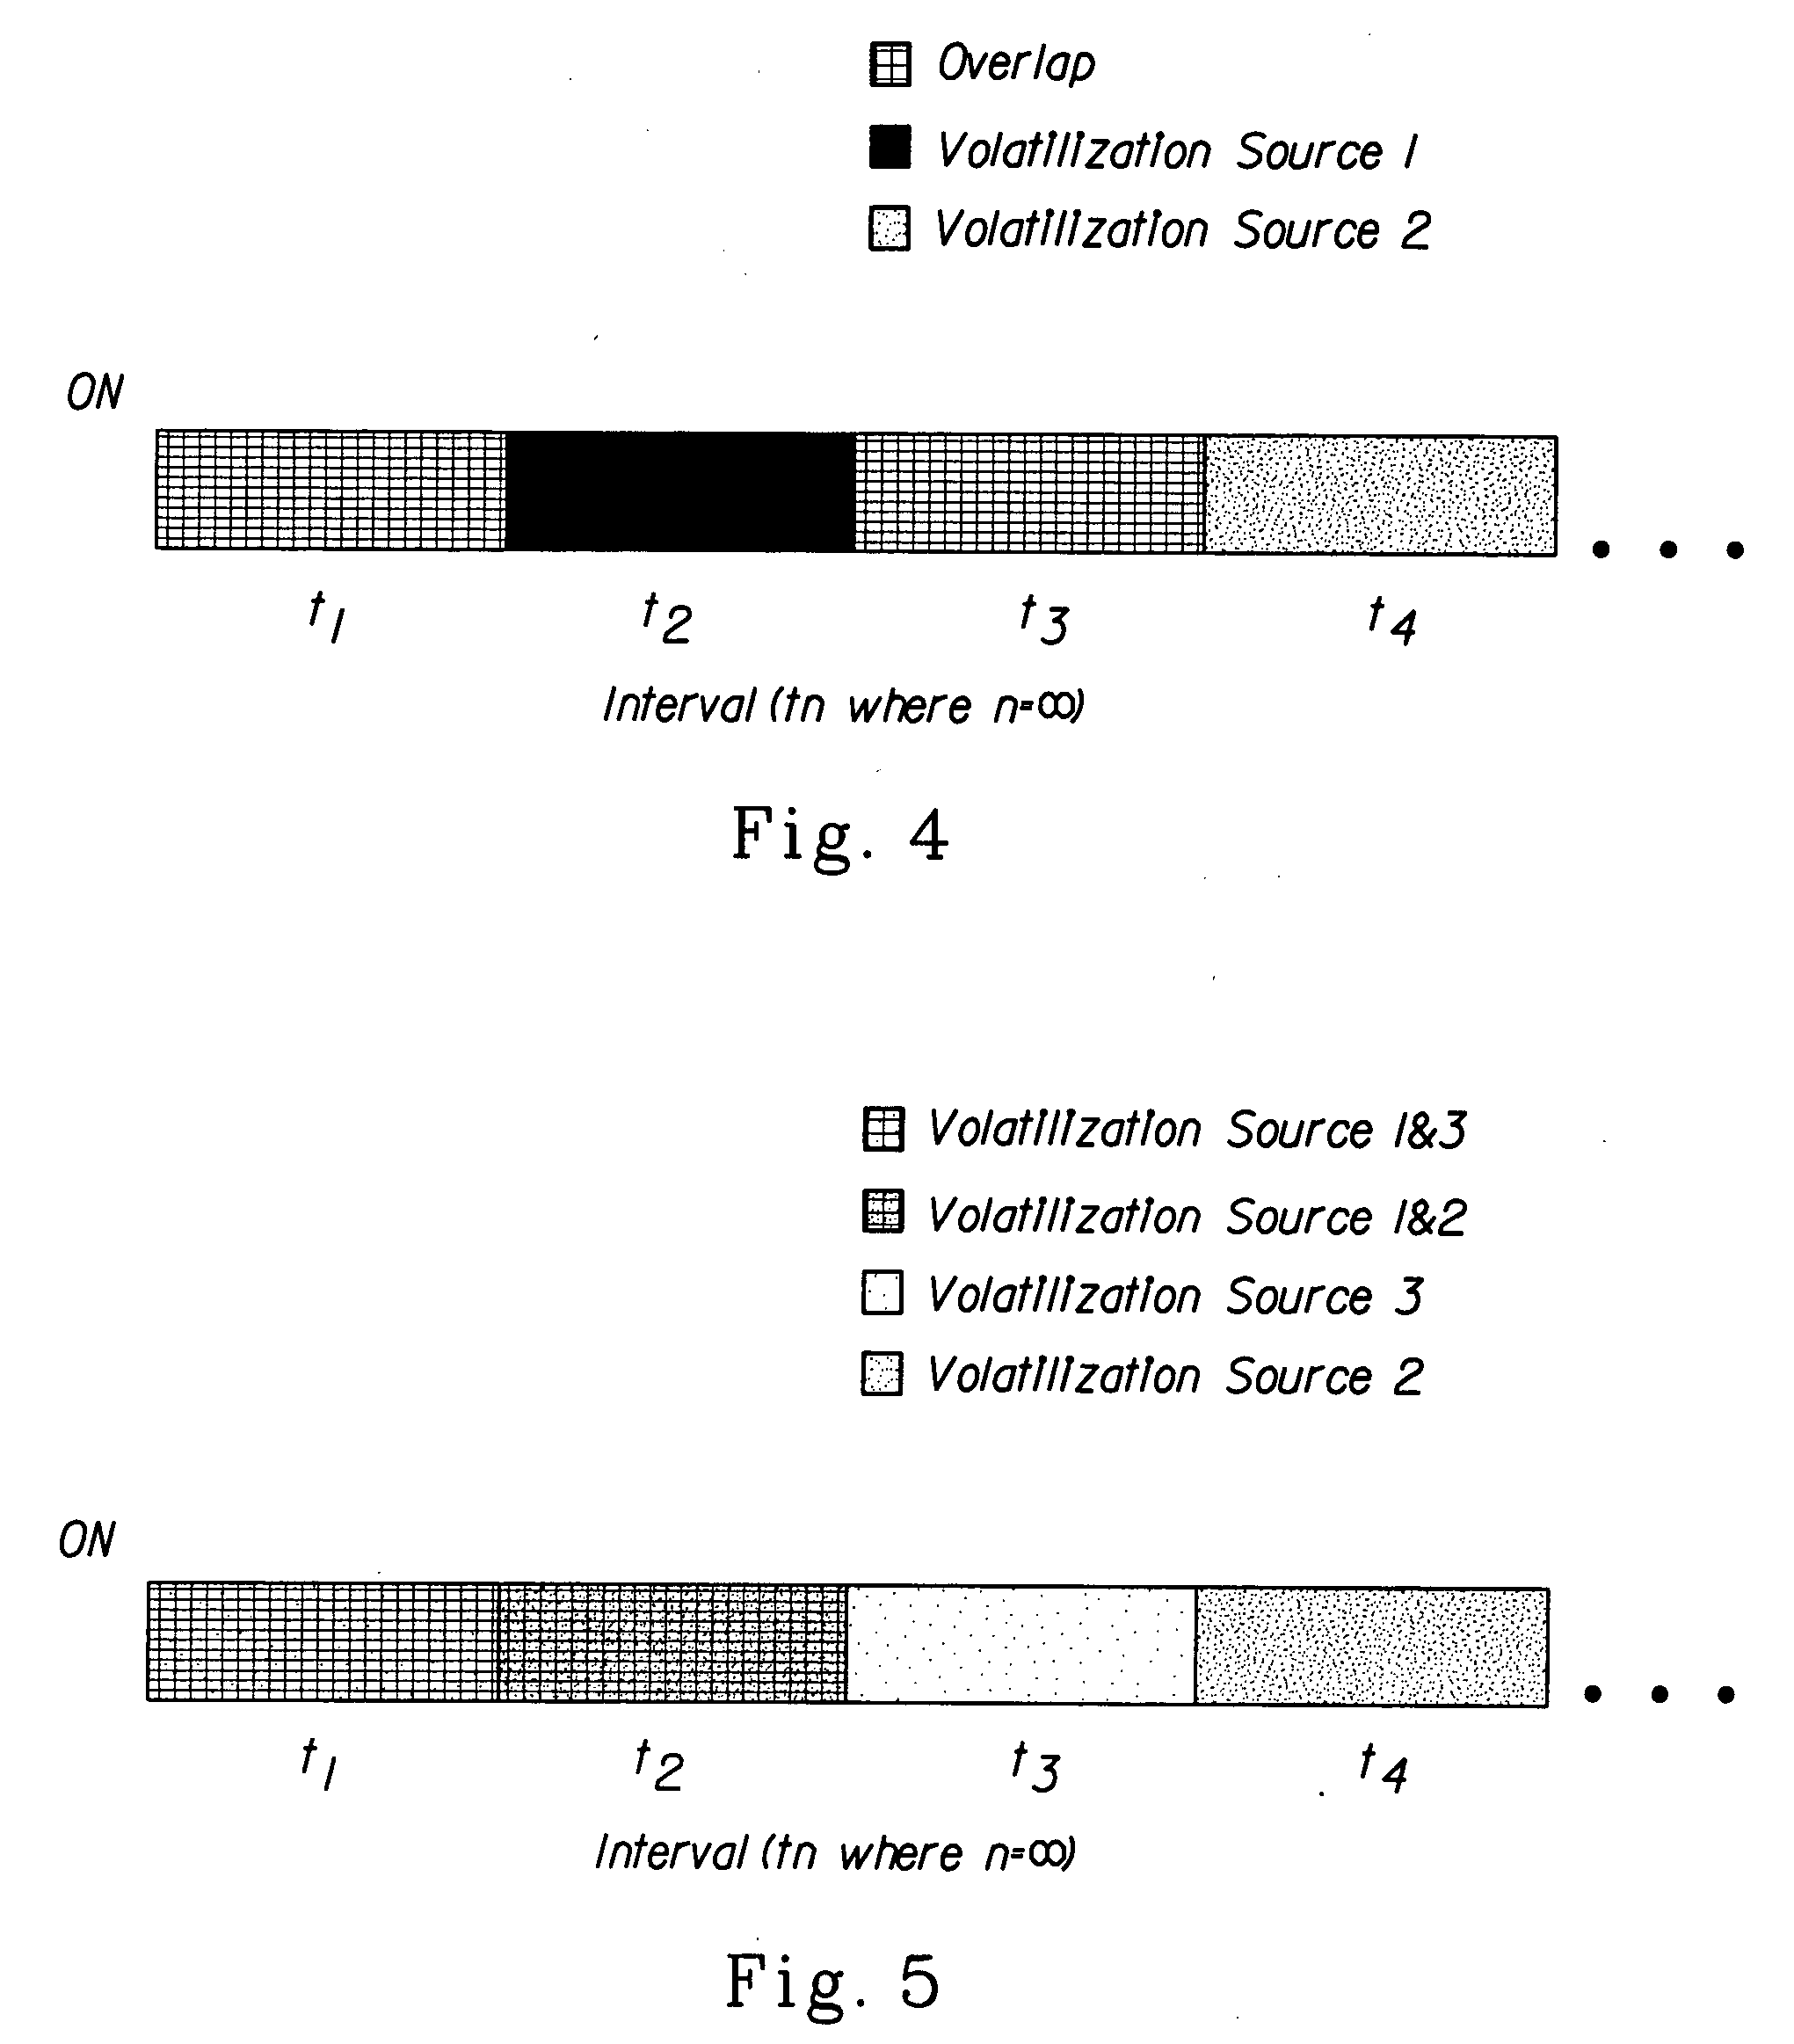 Systems and devices for emitting volatile compositions